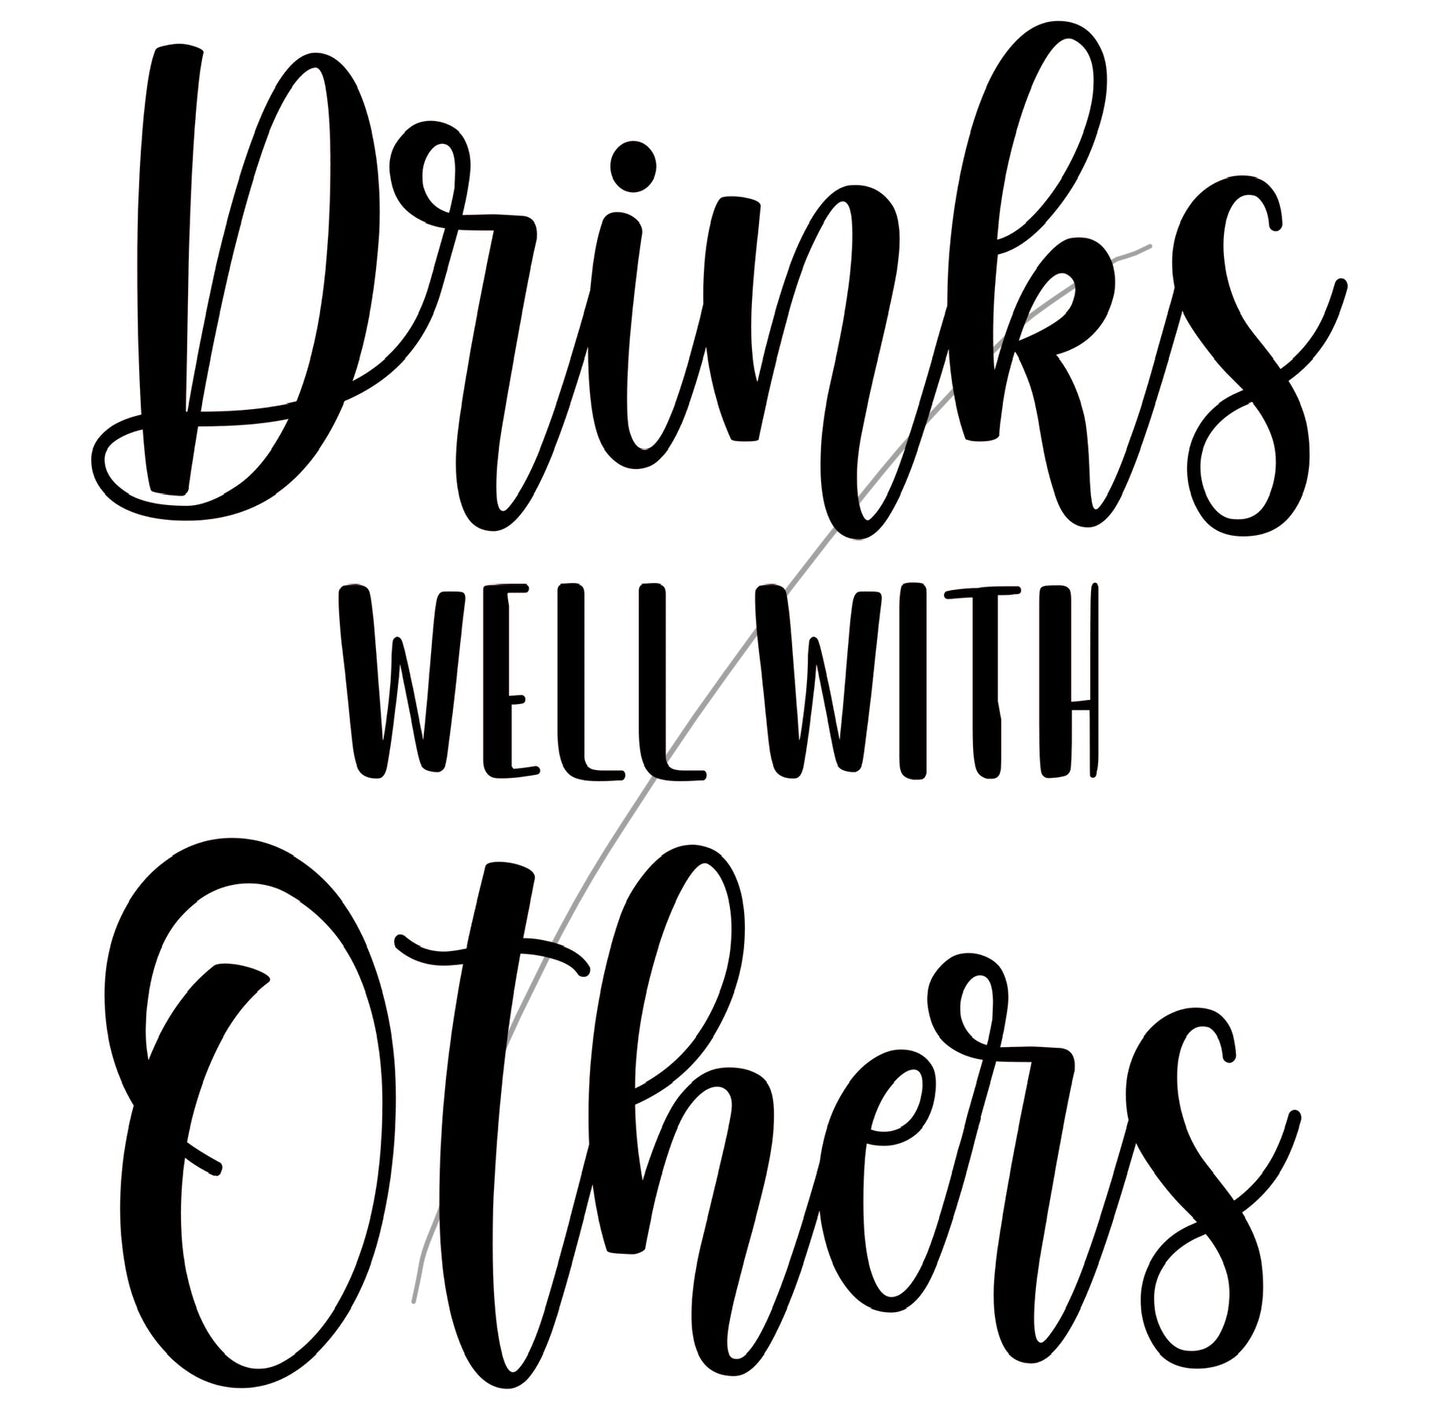 Drinks well with others